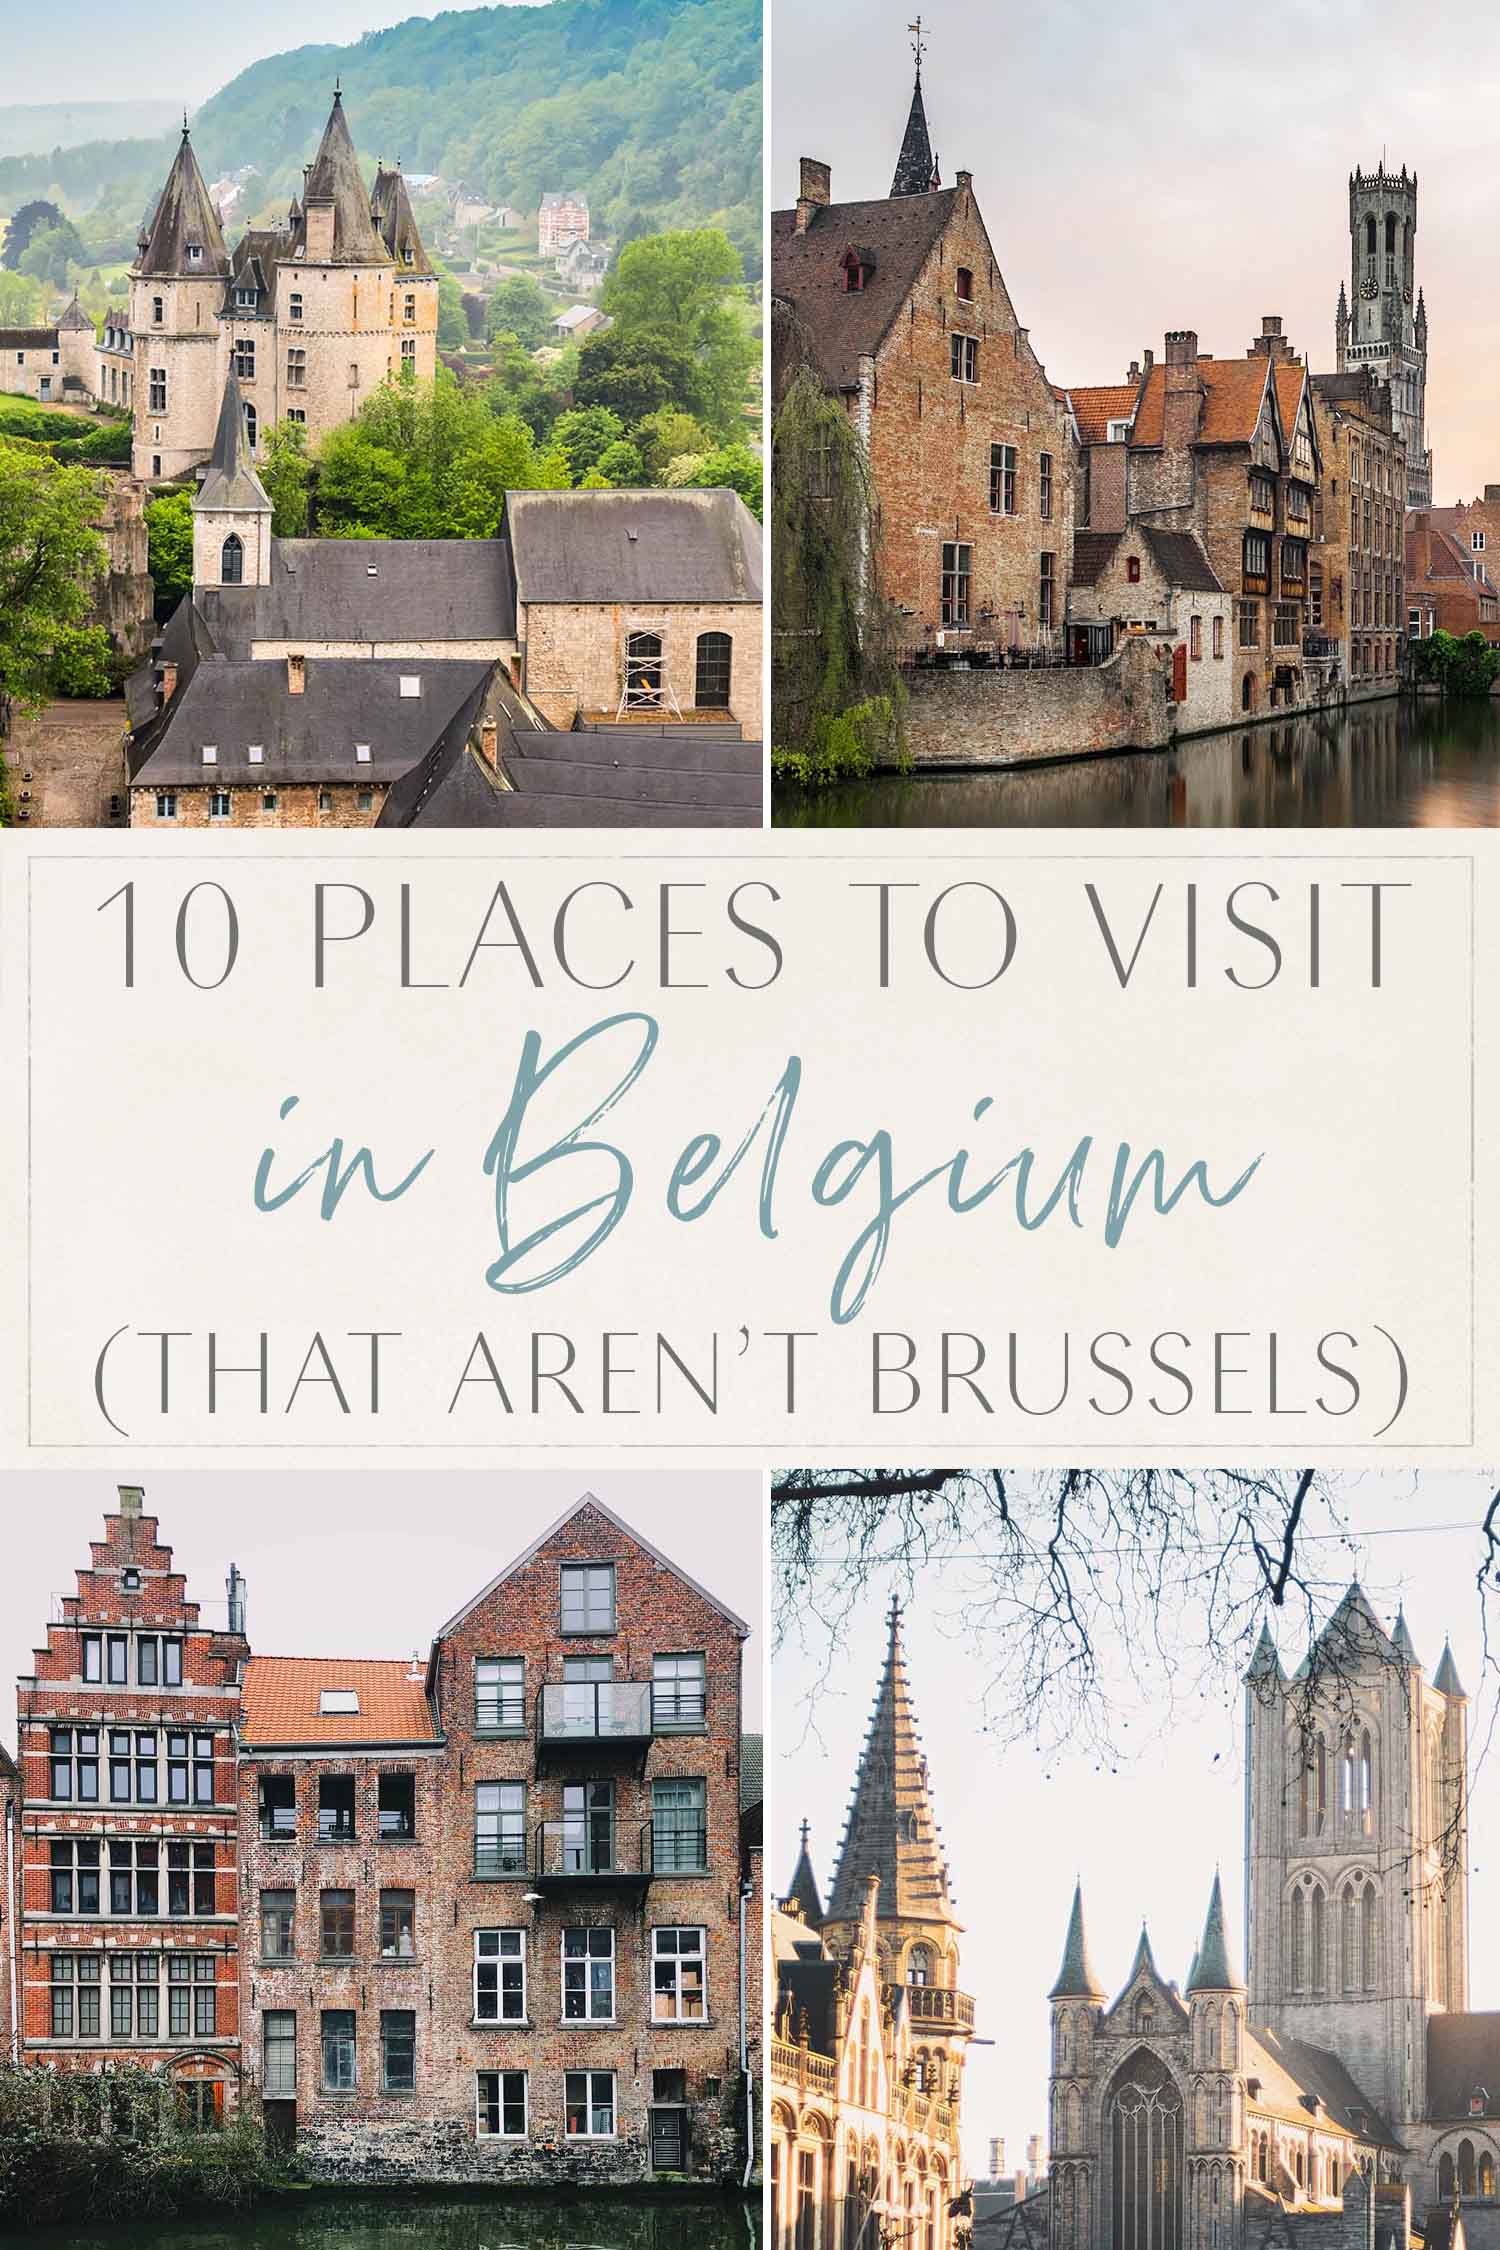 10 Places to Visit in Belgium that aren't brussels